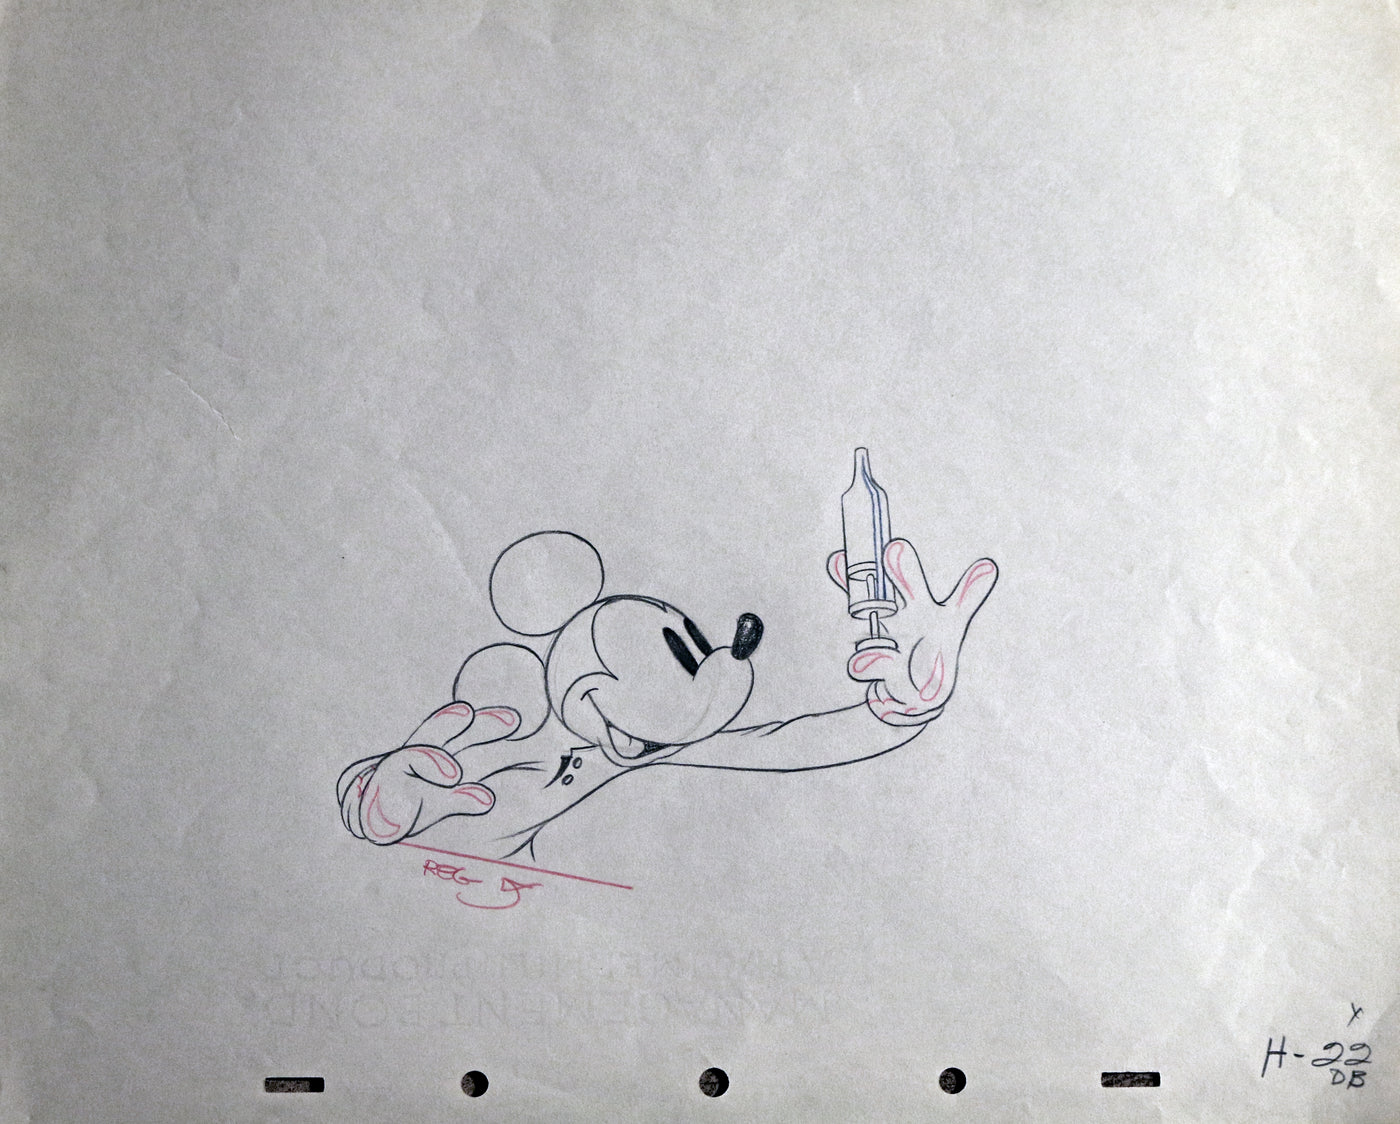 Original Walt Disney Production Drawing of Mickey Mouse from The Worm Turns (1937)